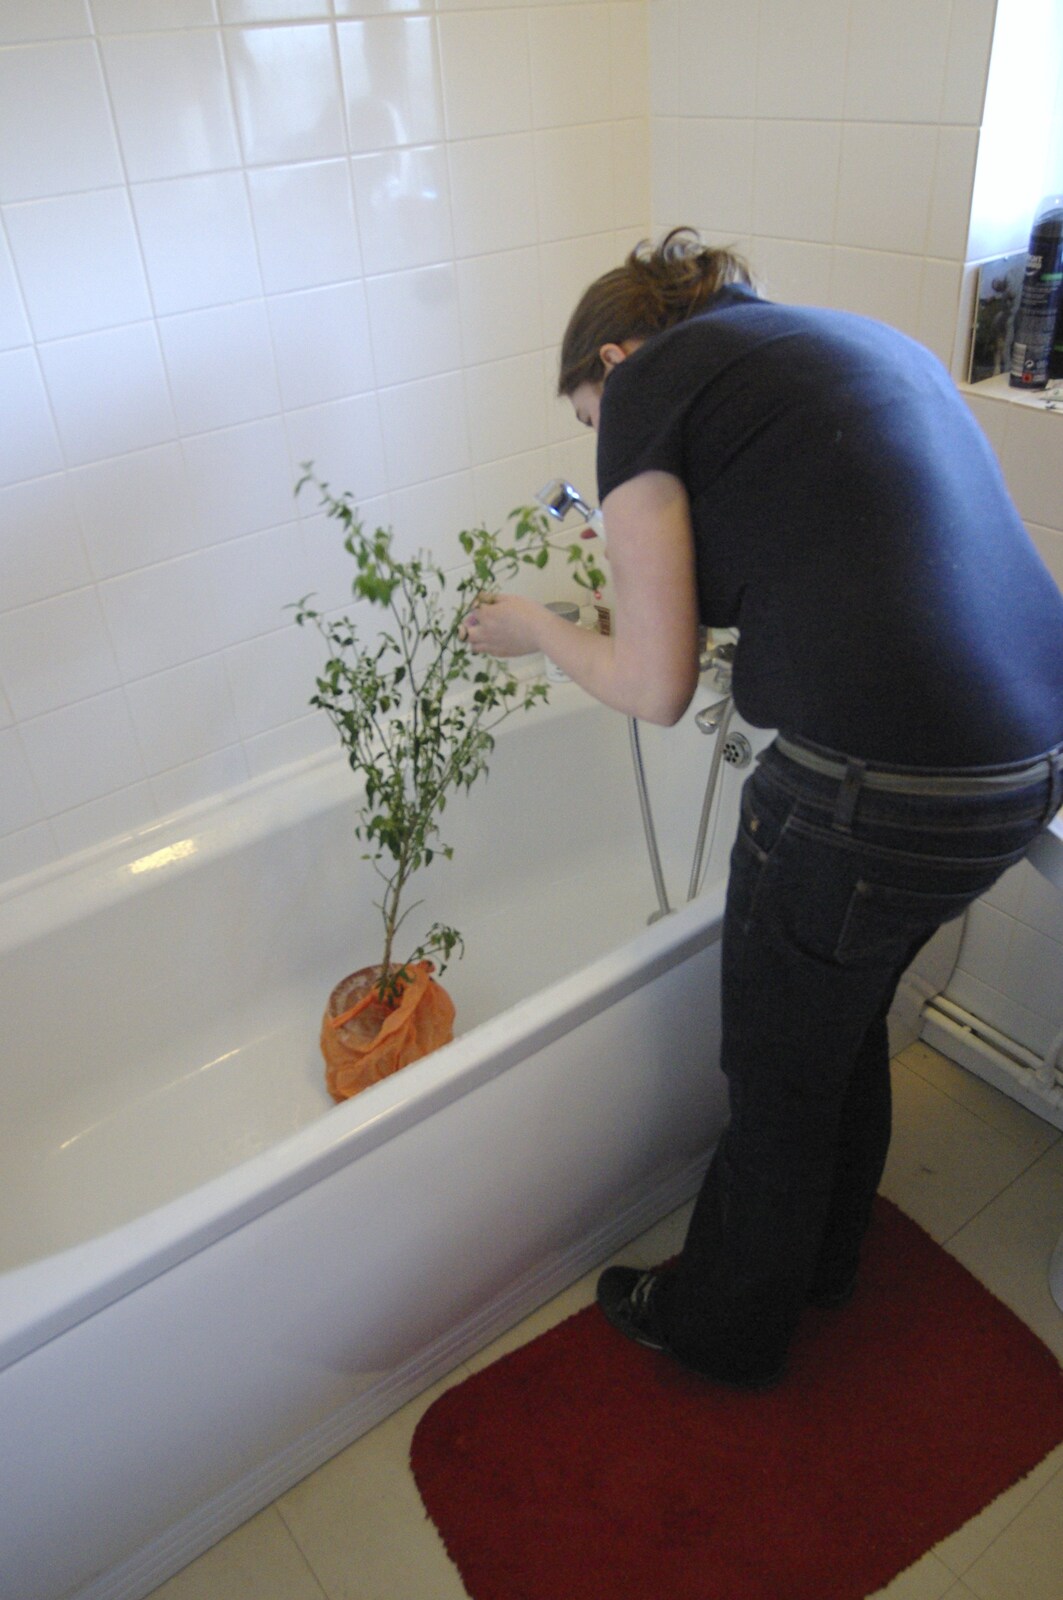 Isobel gives her chilli plant a shower from The Derelict Salam Newsagents, Perne Road, Cambridge - 18th March 2007